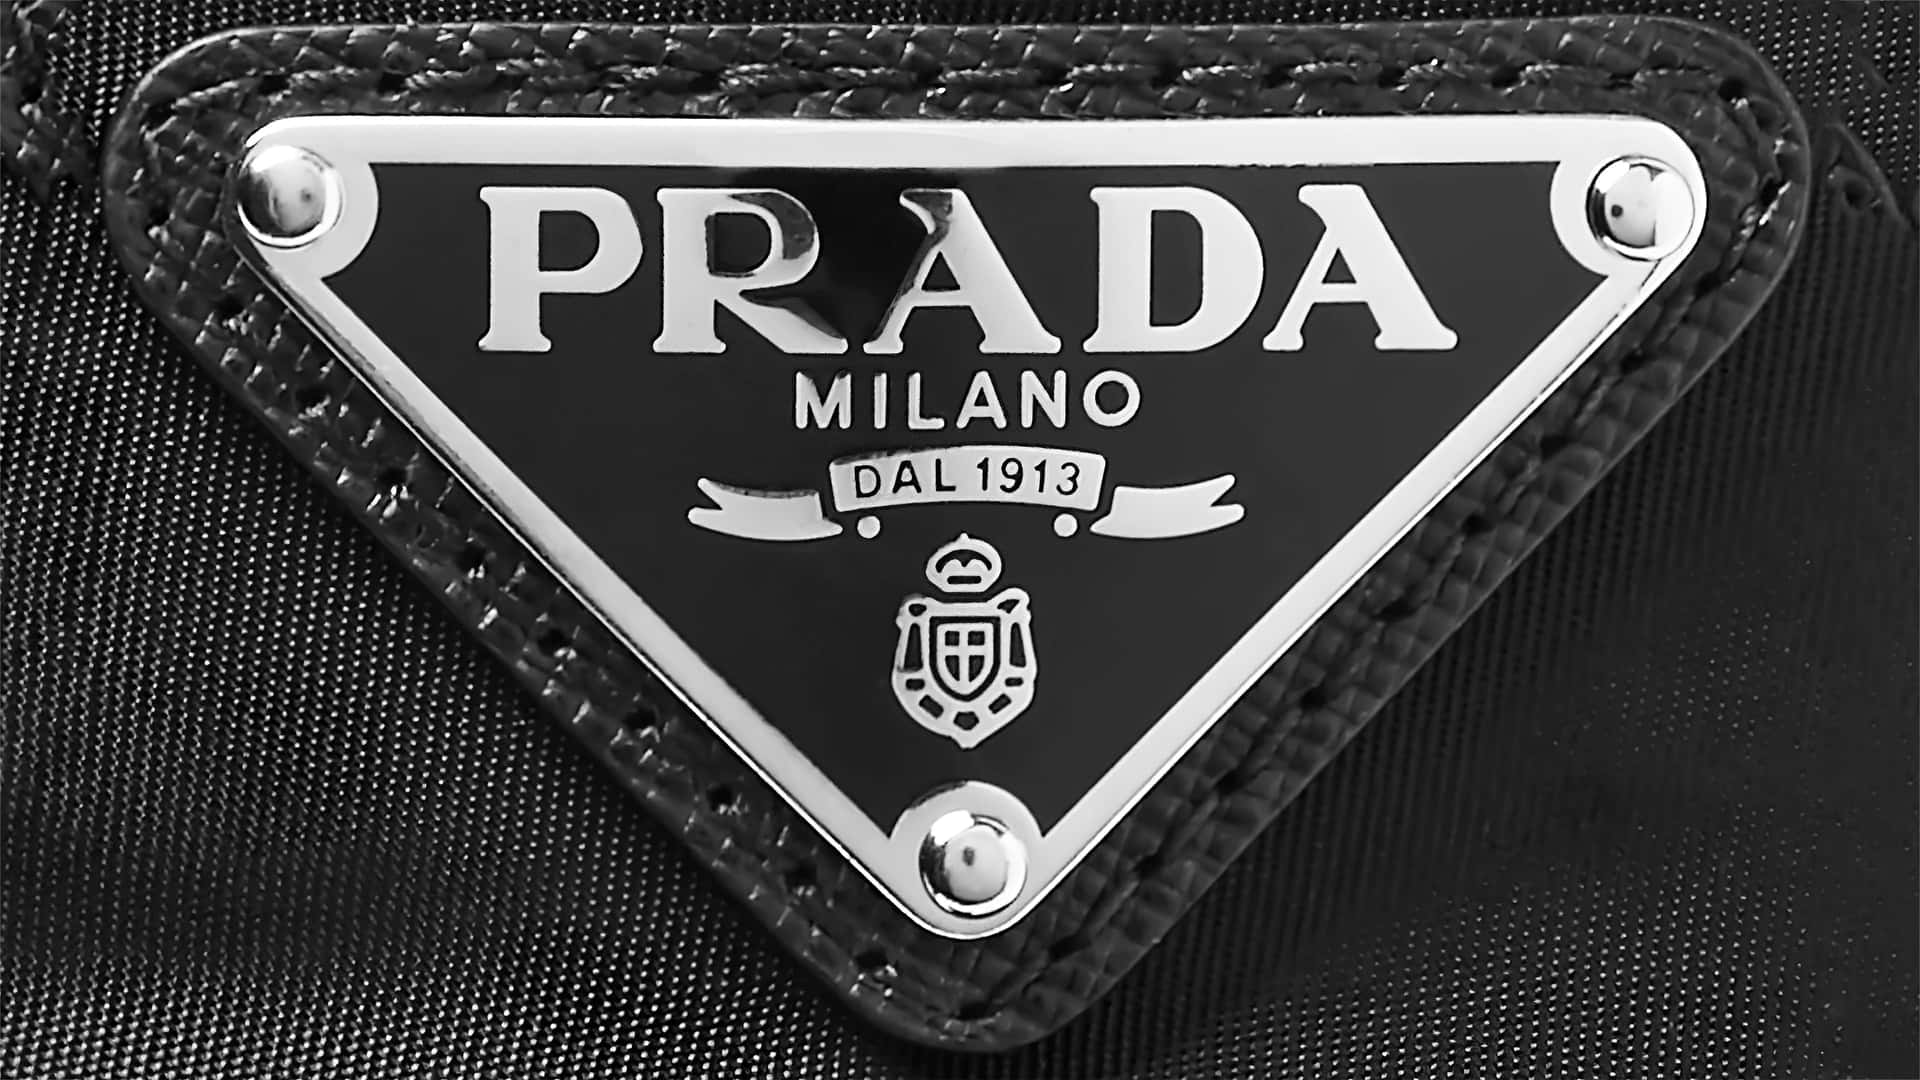 Be bold and stand out with Prada.